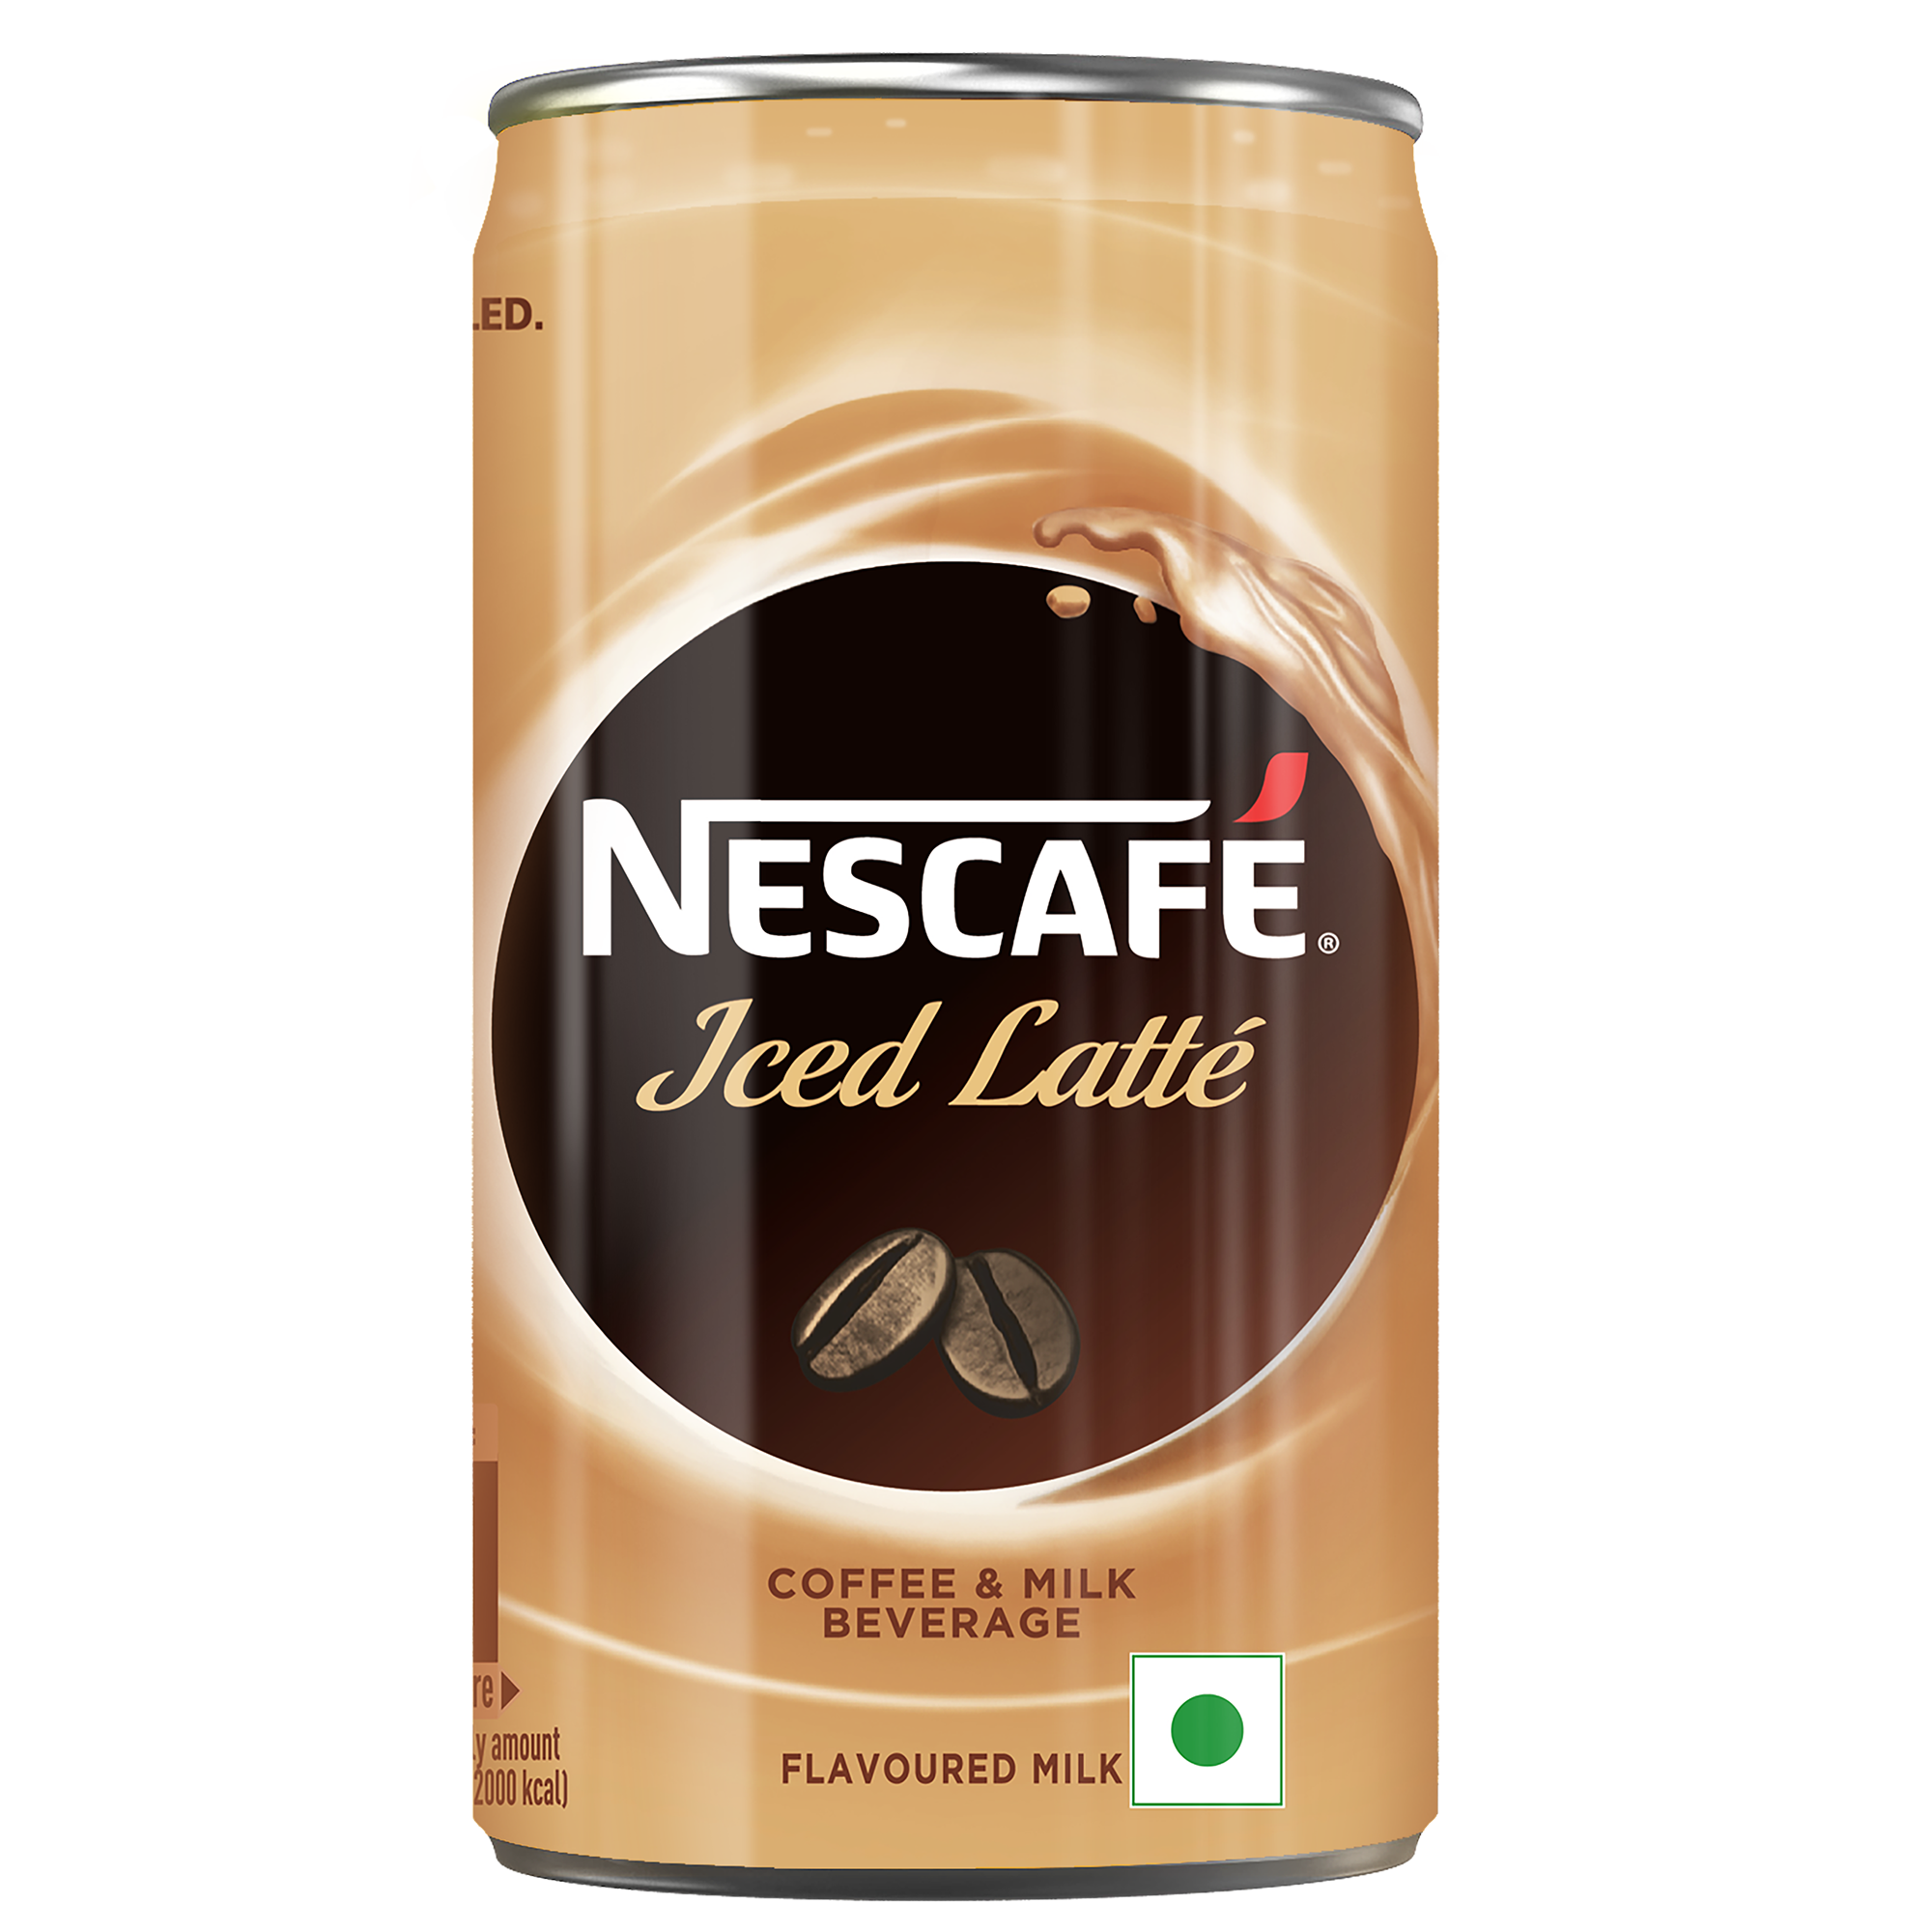 https://www.nescafe.com/in/sites/default/files/2022-06/New-Chilled-Latte-Can-Artwork-21_RSA-3D.png